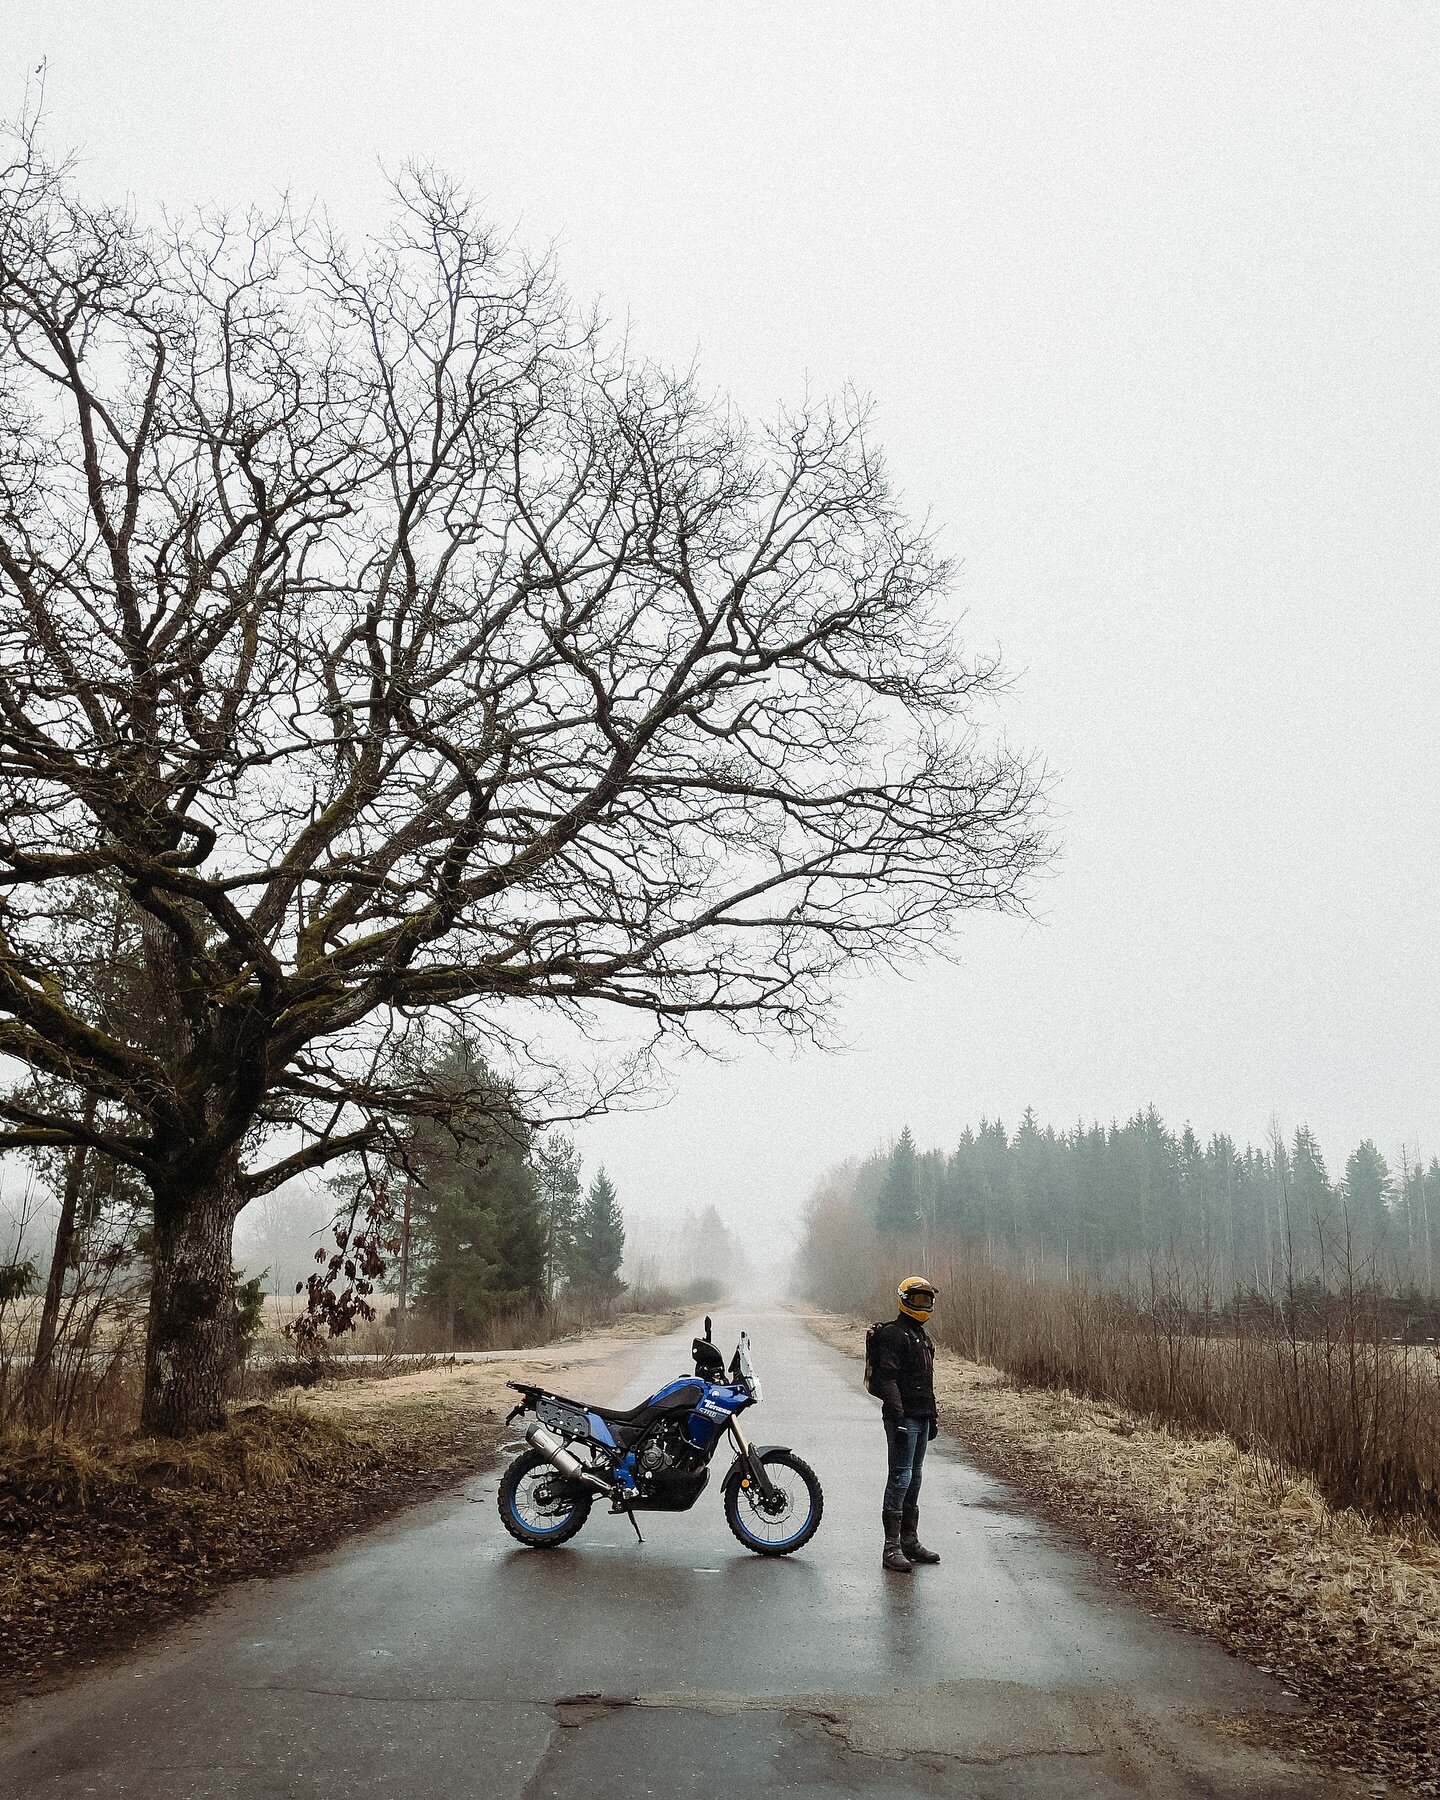 Early spring, moody morning. 
Perfect for some pictures with my bike. 😏

Follow more of my motorcycle adventures on @billijs.moto 

#motorcycle #tenere #fog